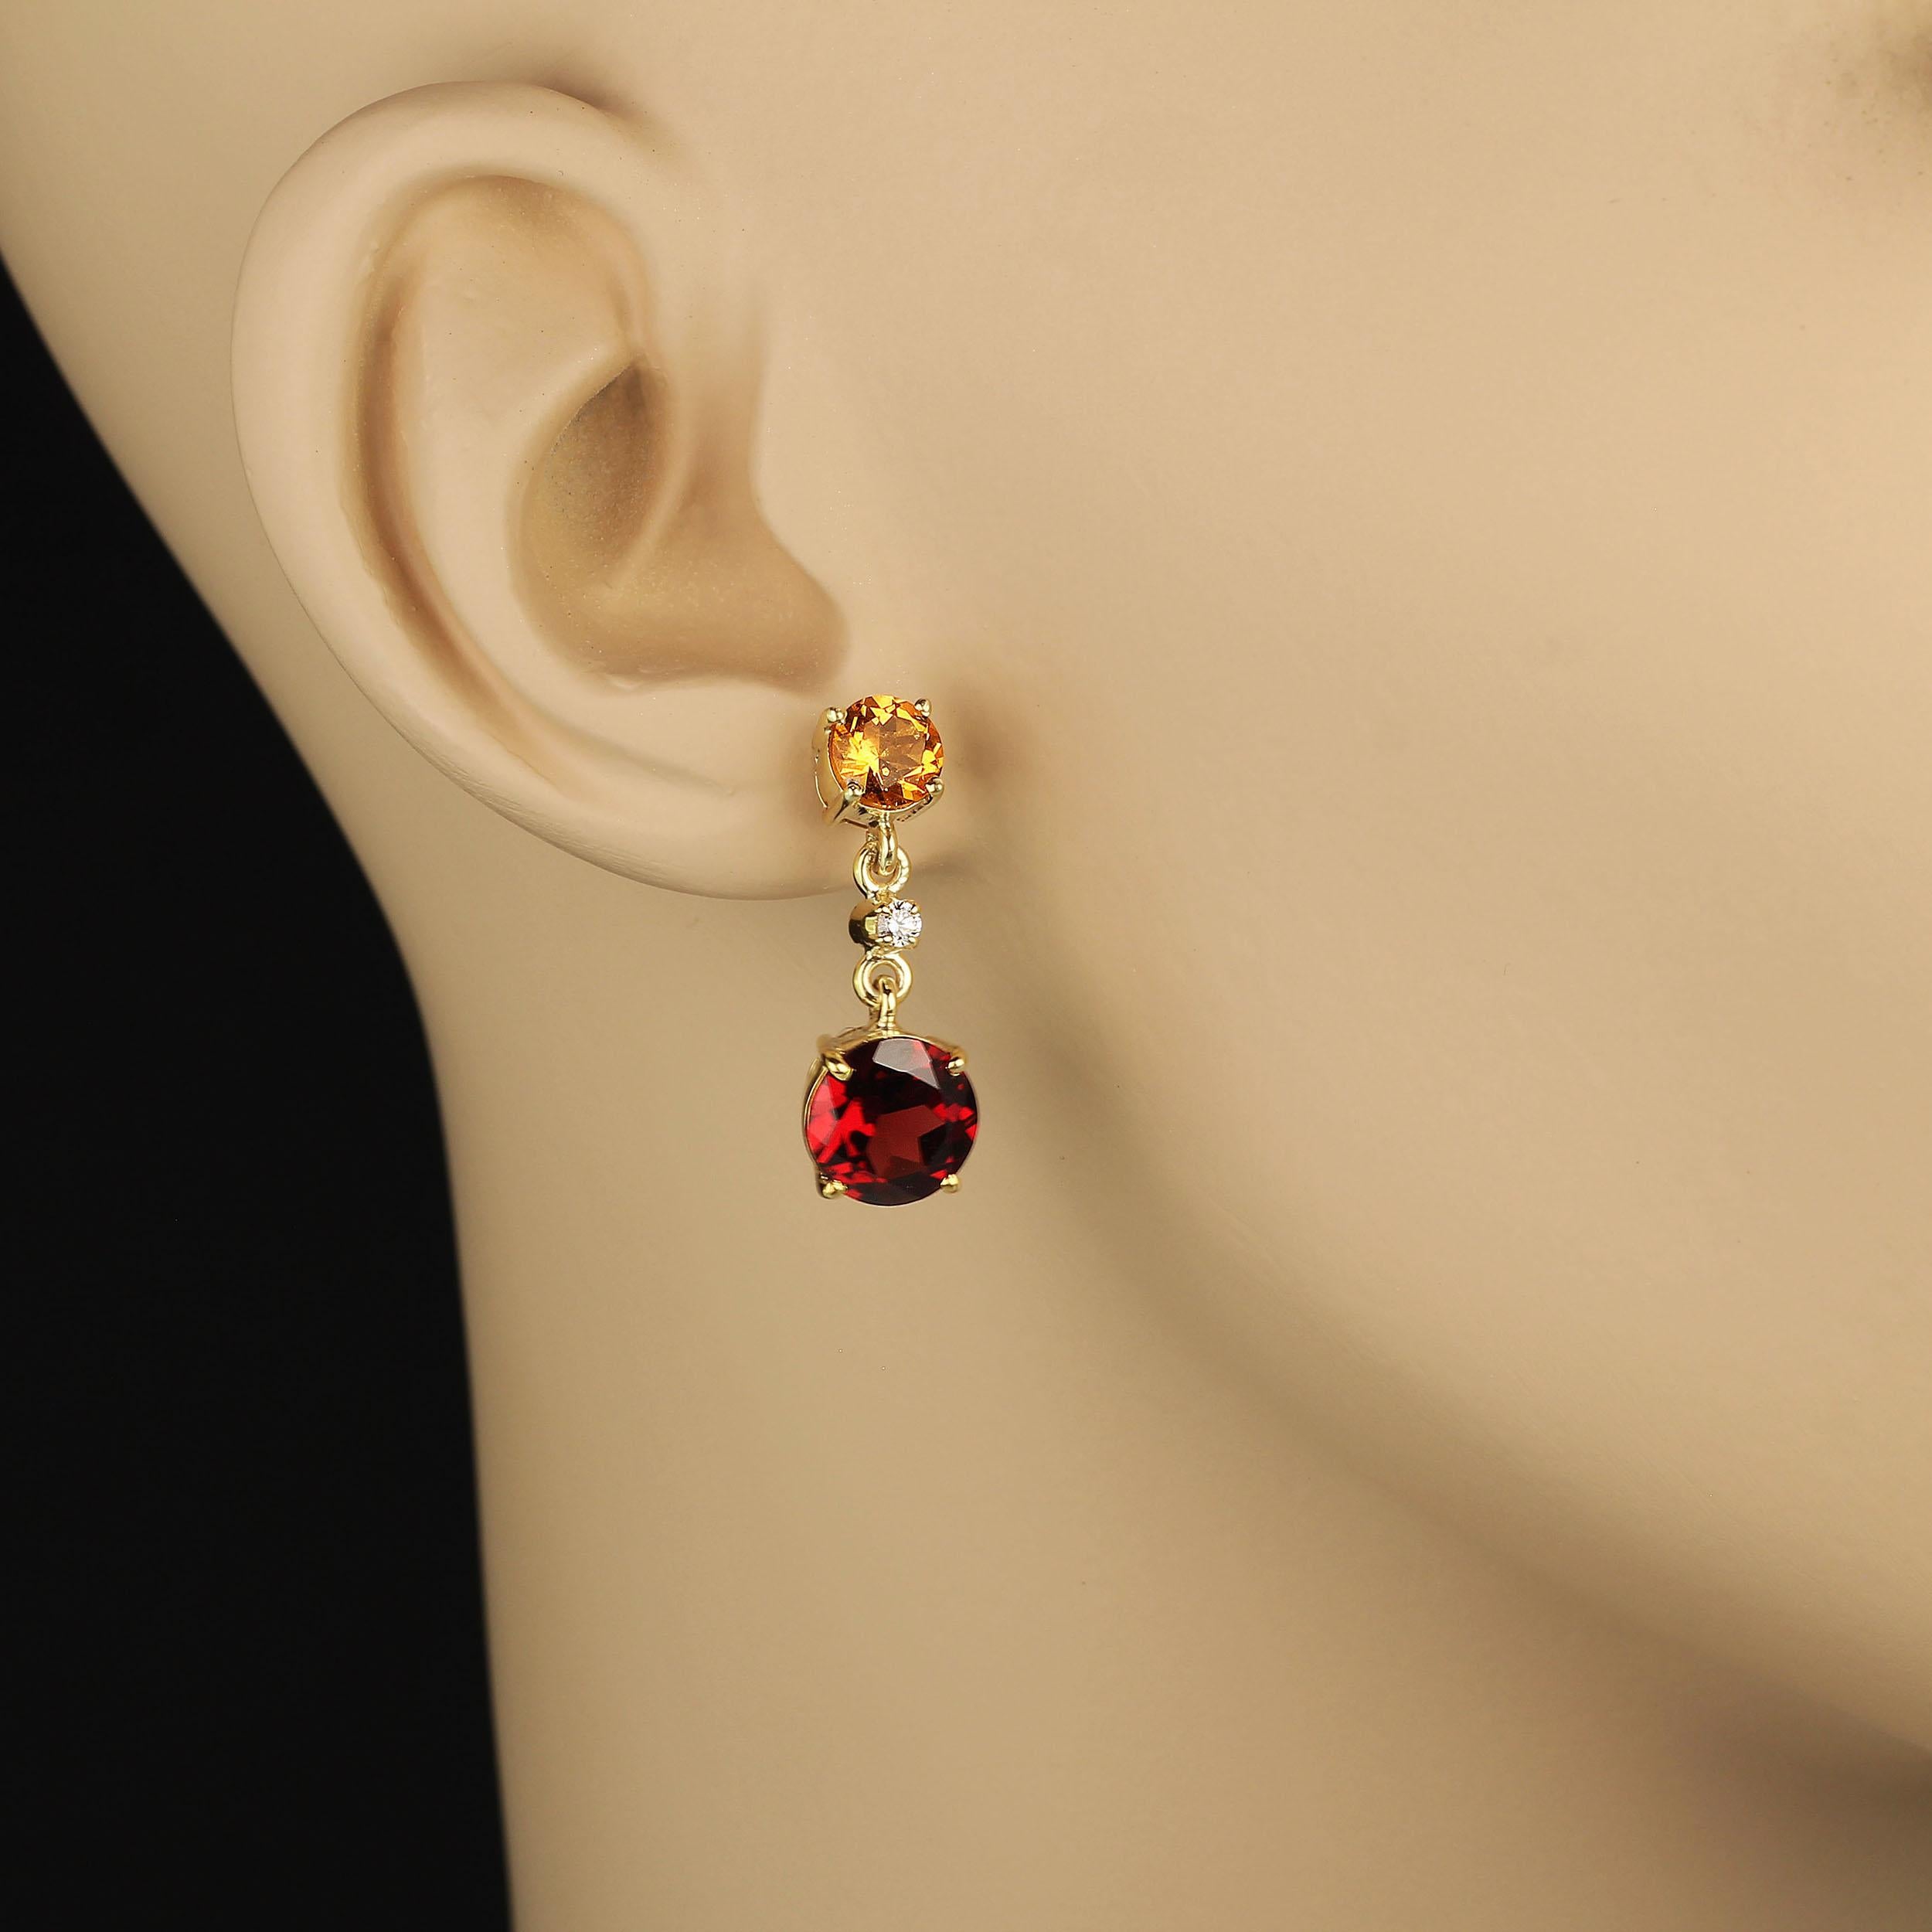 Sparkling Citrine and Garnet dangle earrings in gold rhodium over Sterling Silver handmade settings.  These gorgeous earrings are unique and spectacular, perfect for those who crave the best in gemstones and love drama. Garnet is great gift as it is